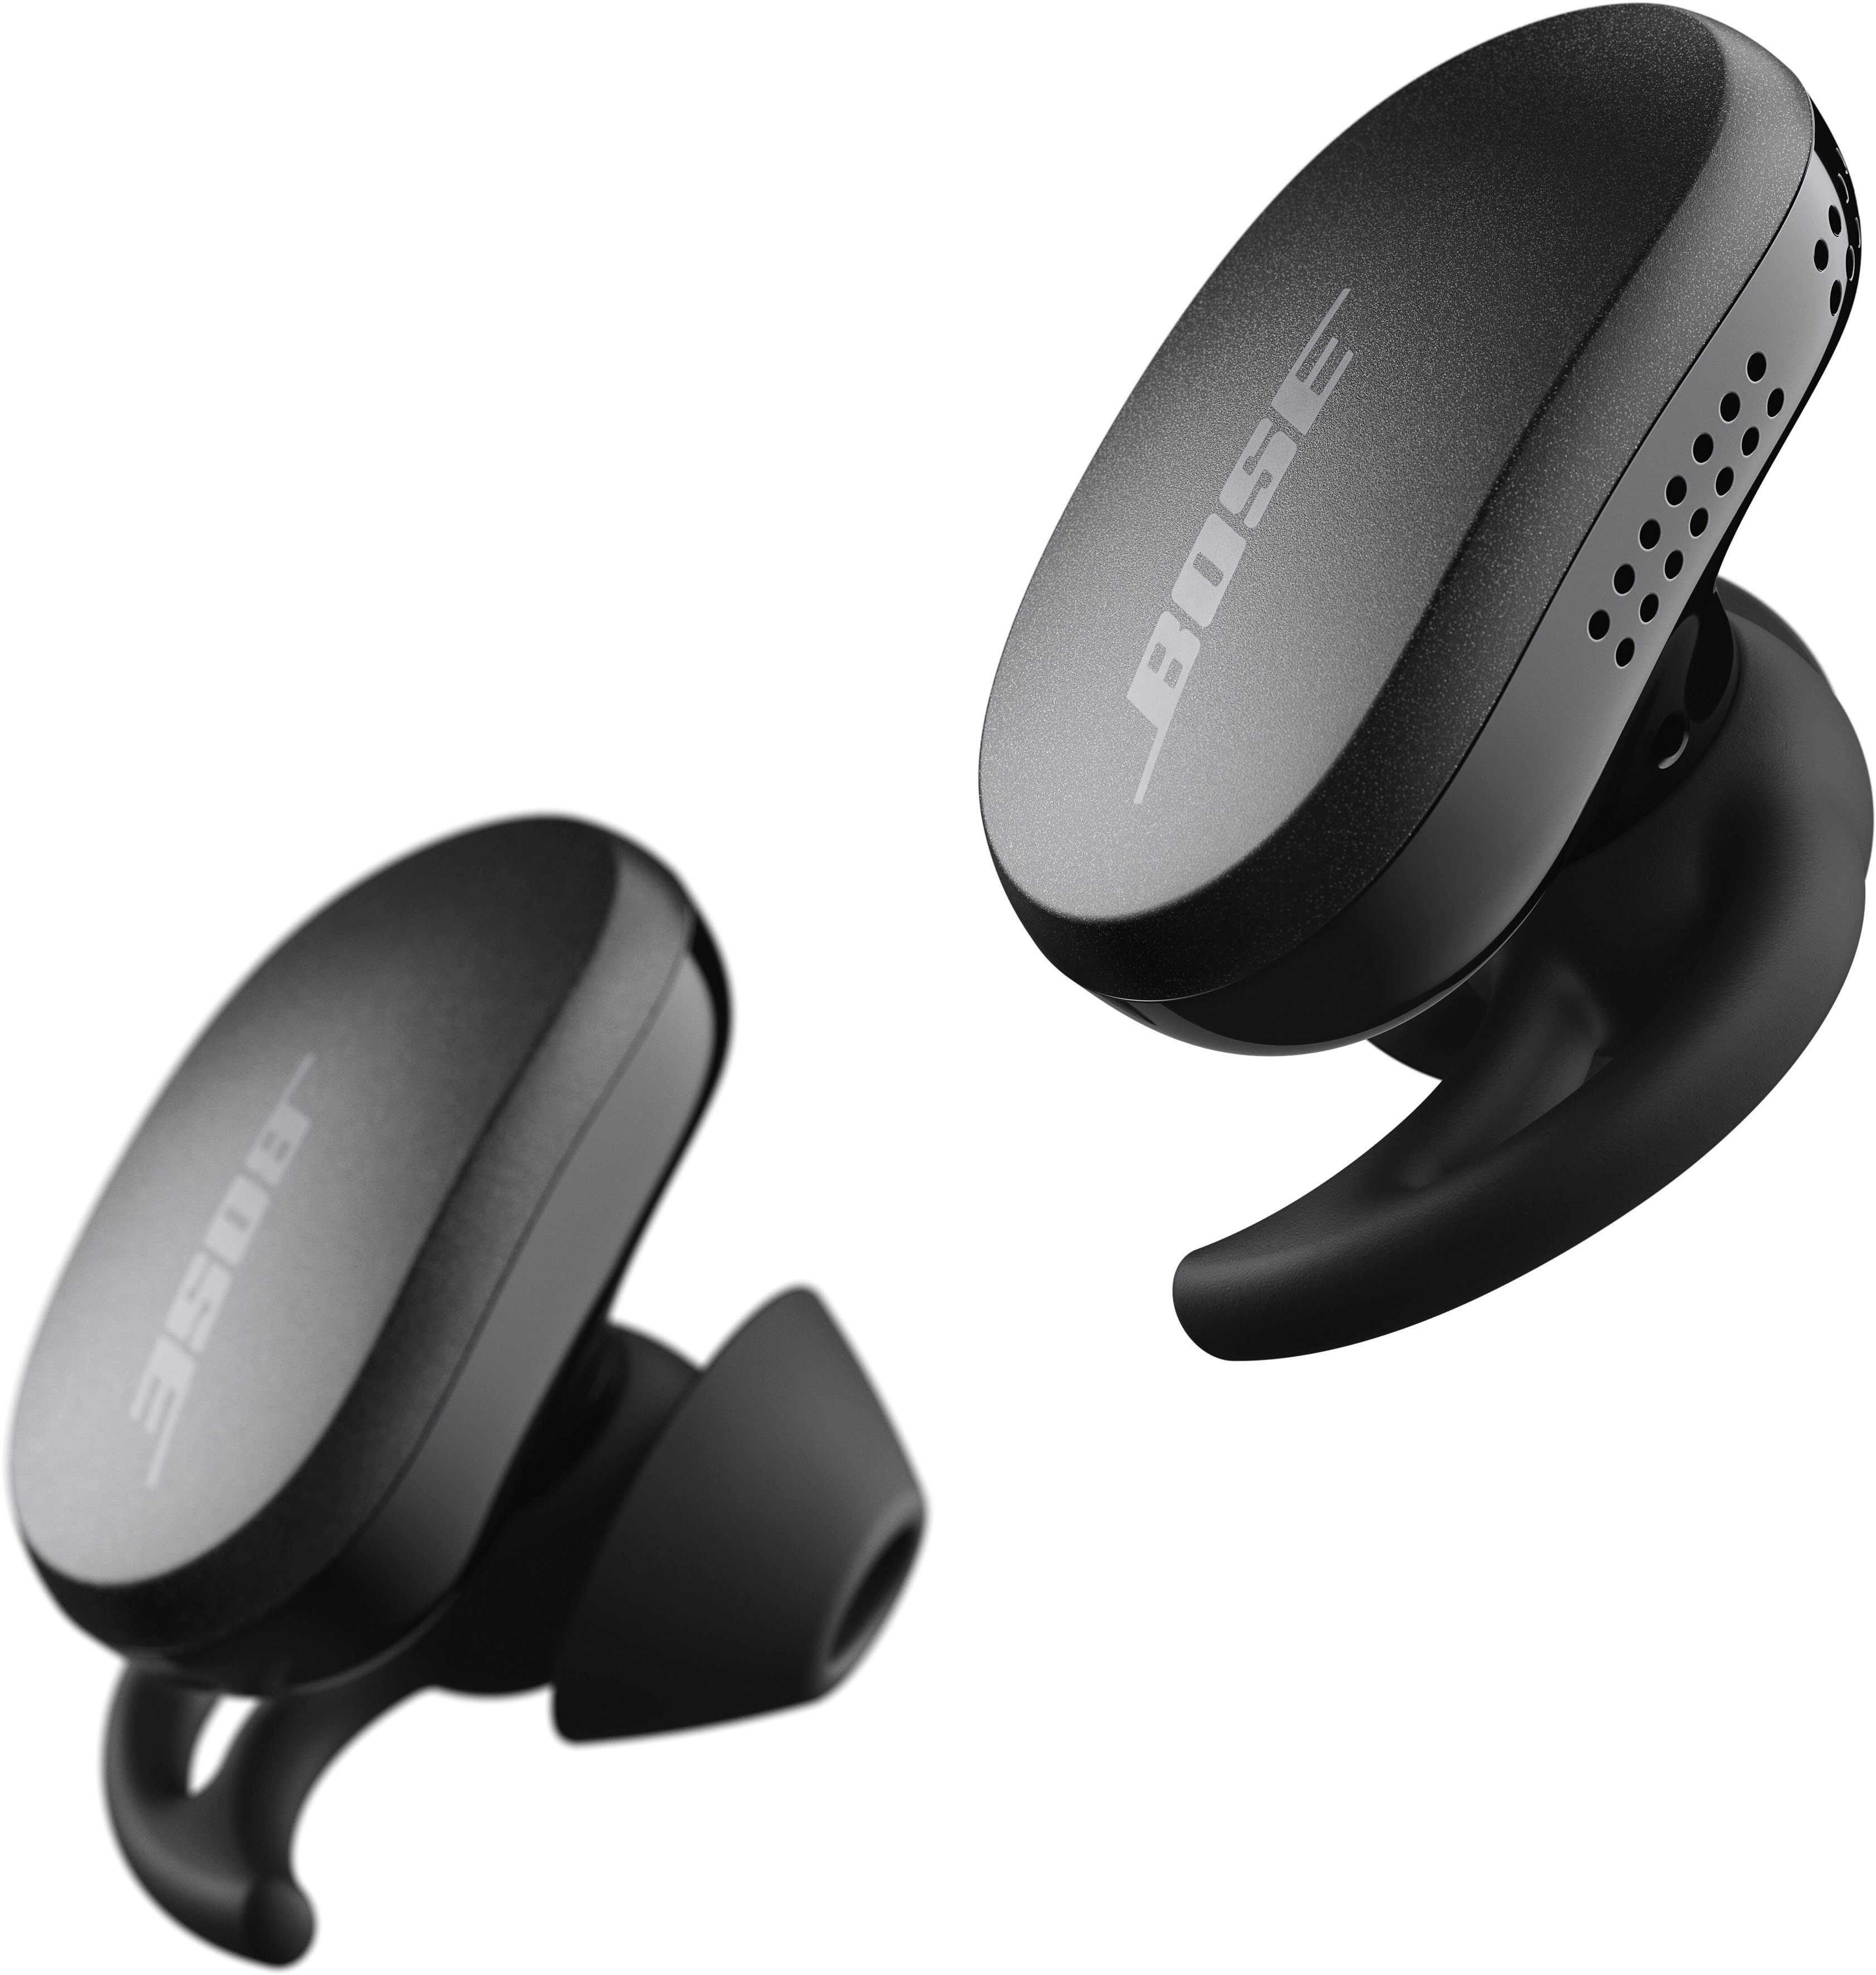 Bose »QuietComfort Earbuds« wireless In-Ear-Kopfhörer (Noise-Cancelling,  Bluetooth, Acoustic Noise Cancelling) online kaufen | OTTO